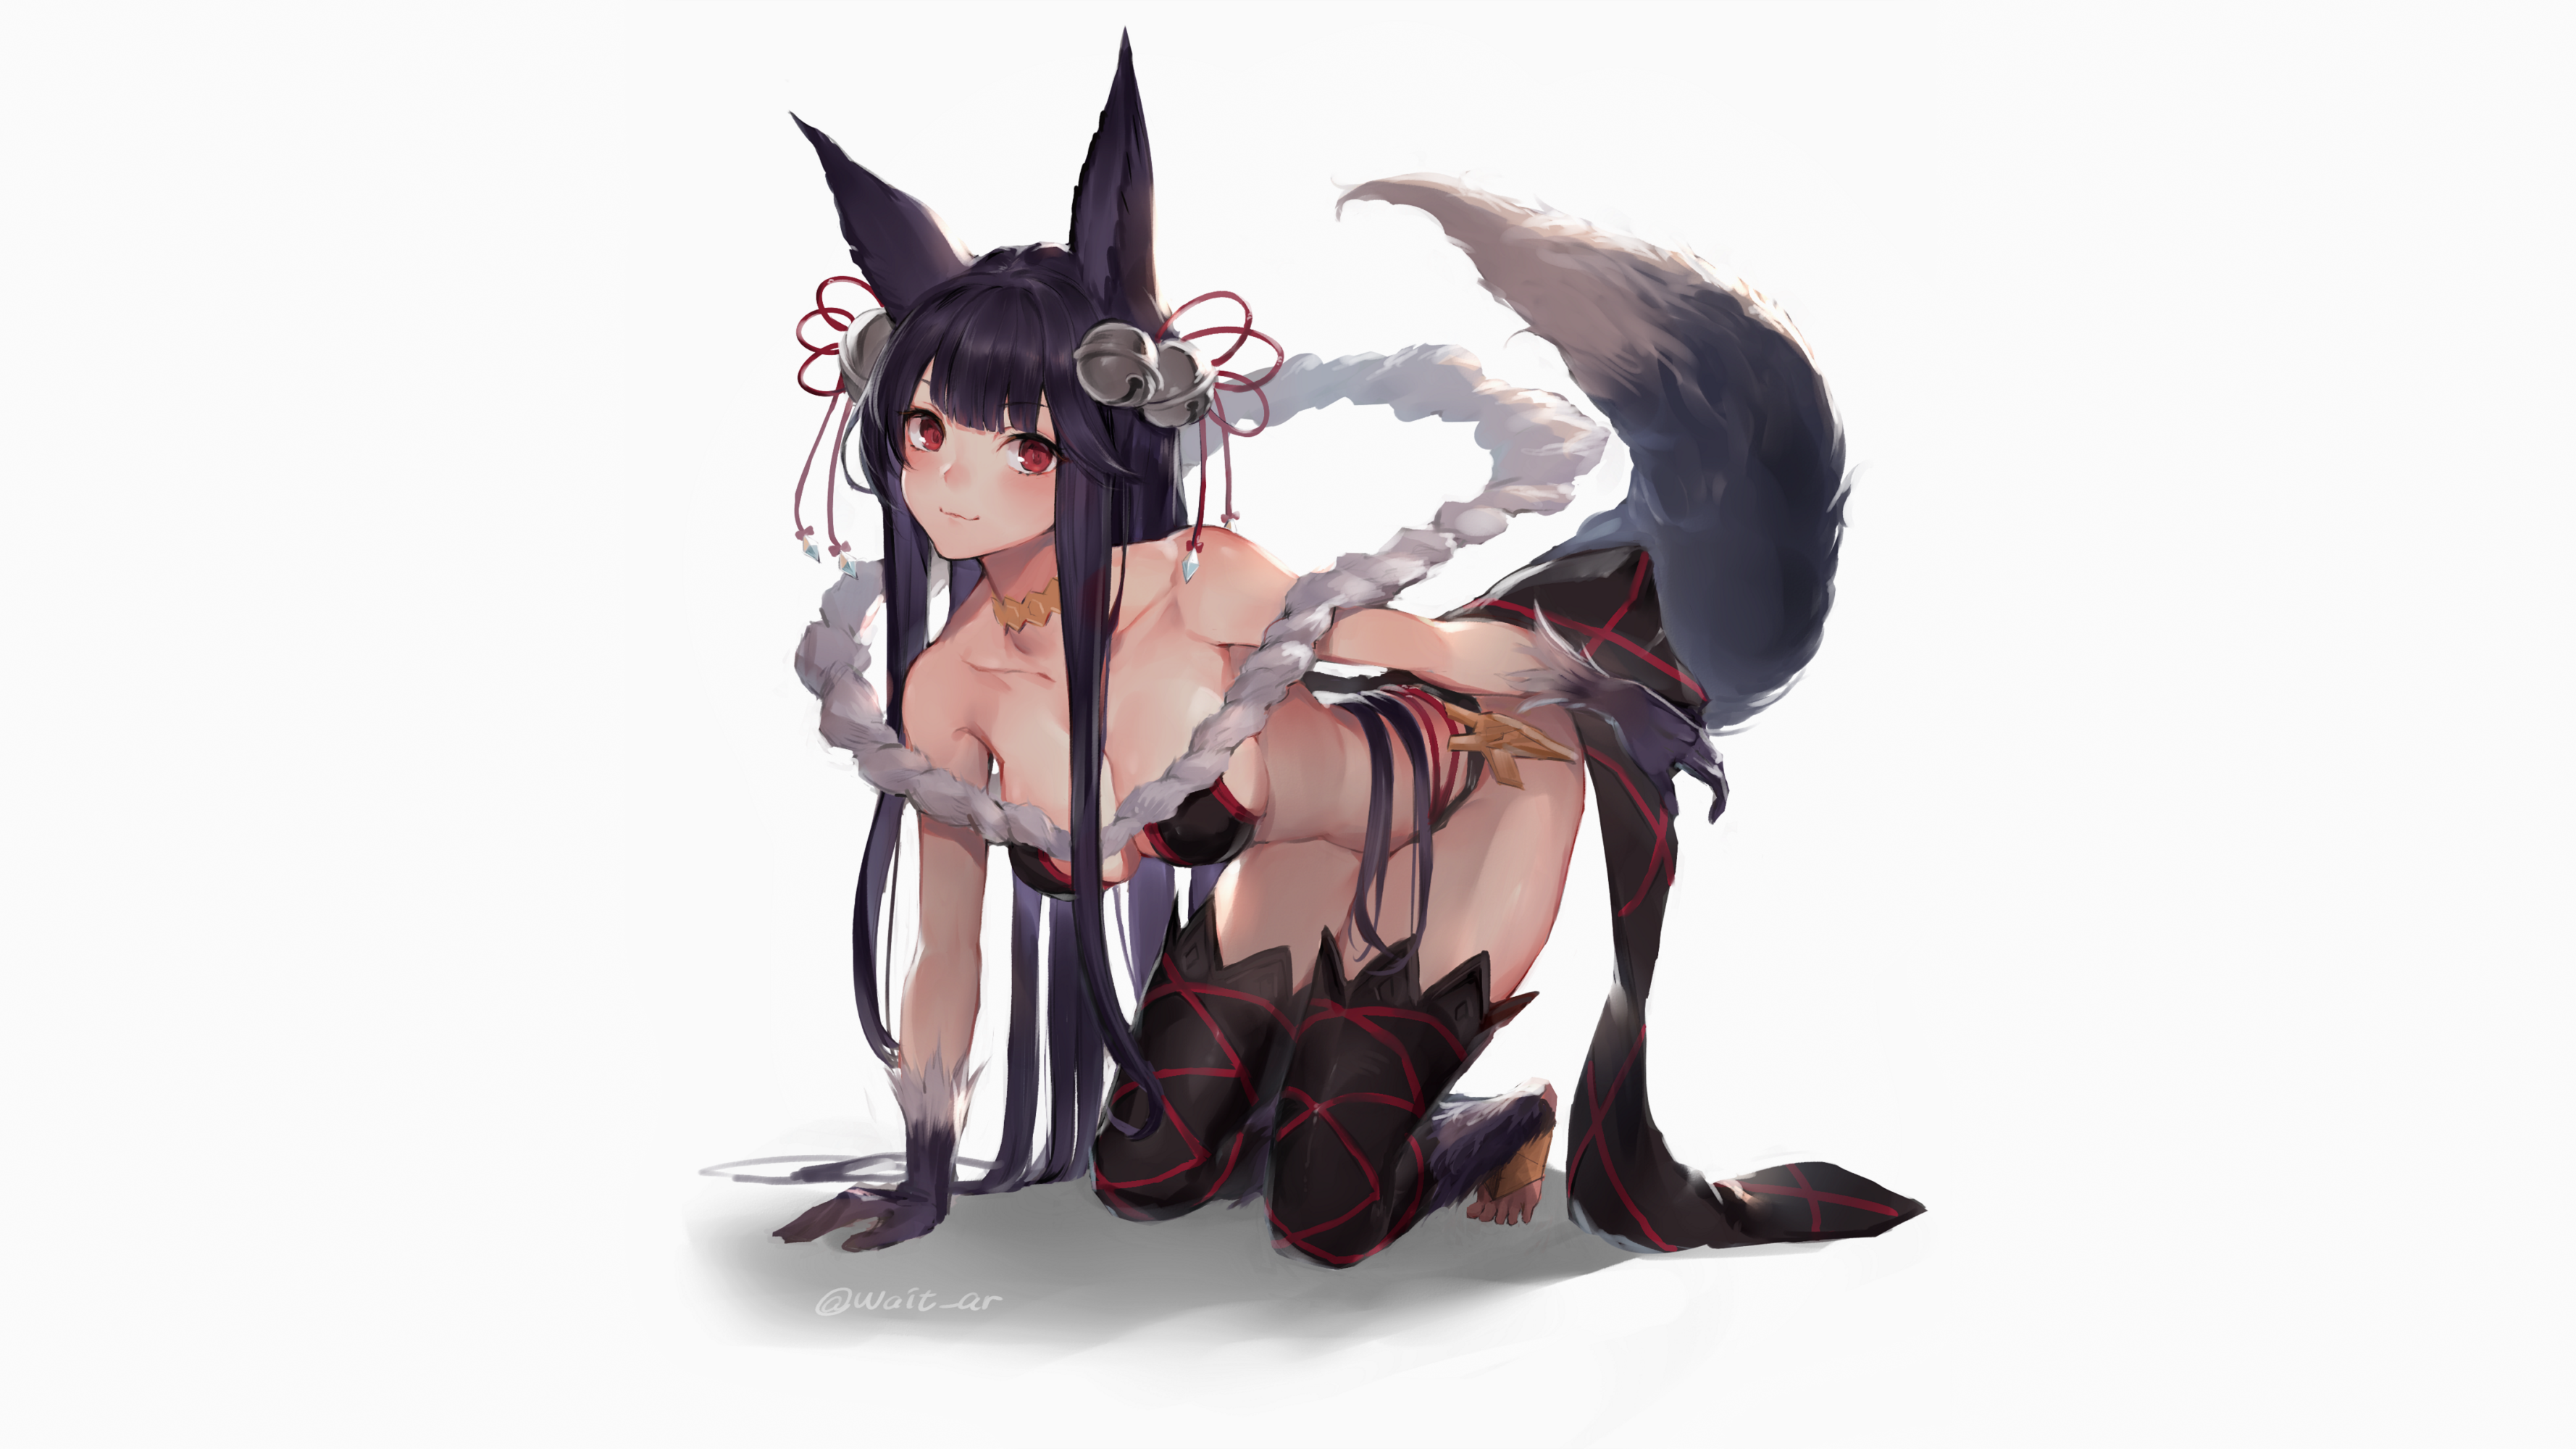 Anime 3556x2000 Yuel (Granblue Fantasy) Granblue Fantasy video games anime anime girls black hair long hair fox girl fox ears tail bells hair ornament red eyes looking at viewer smiling cleavage bent over kneeling gloves necklace fantasy girl white background simple background 2D artwork digital art drawing fan art Wait_ar